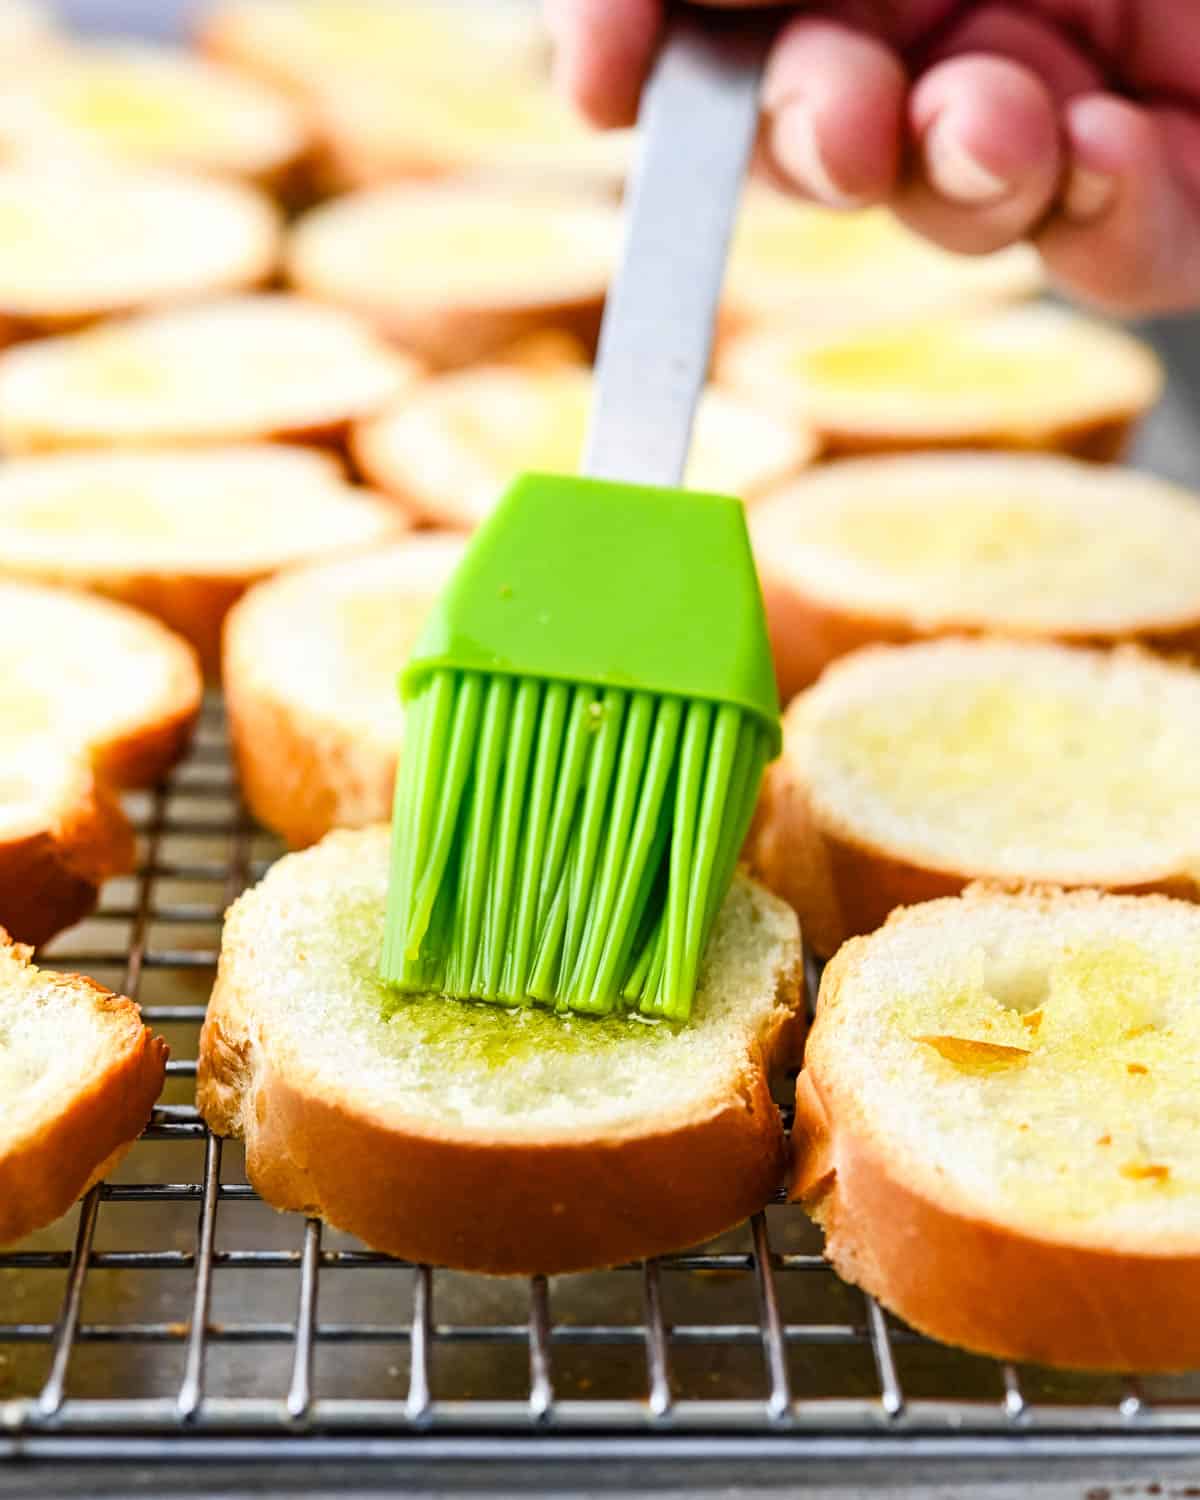 Brushing bread slices with olive oil.